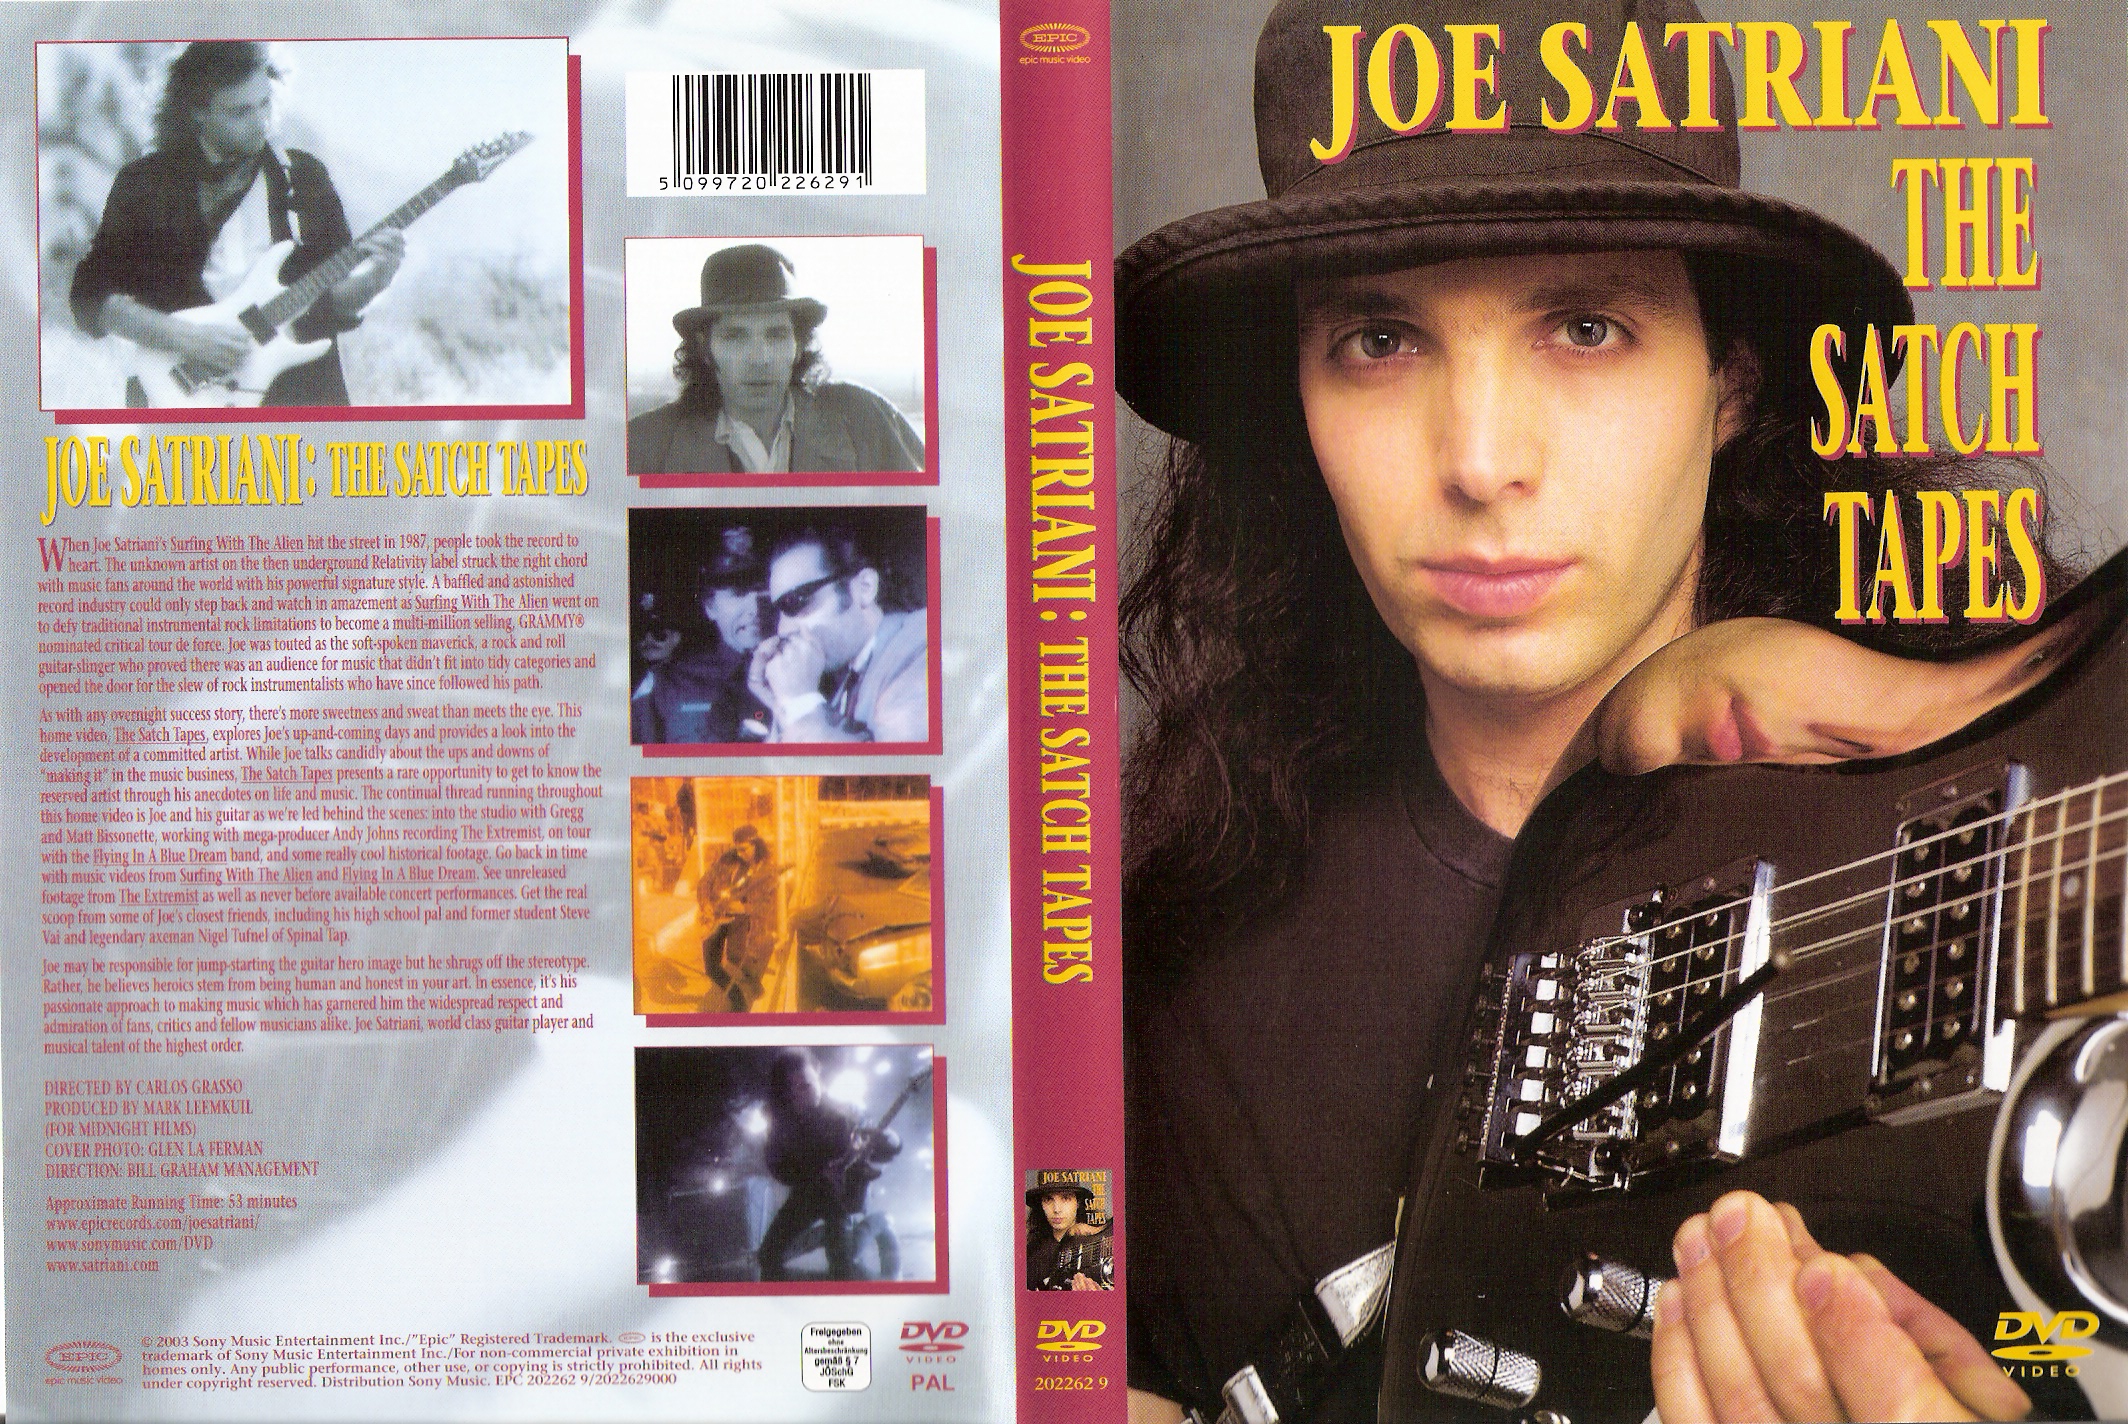 Jaquette DVD Joe Satriani - The satch tapes